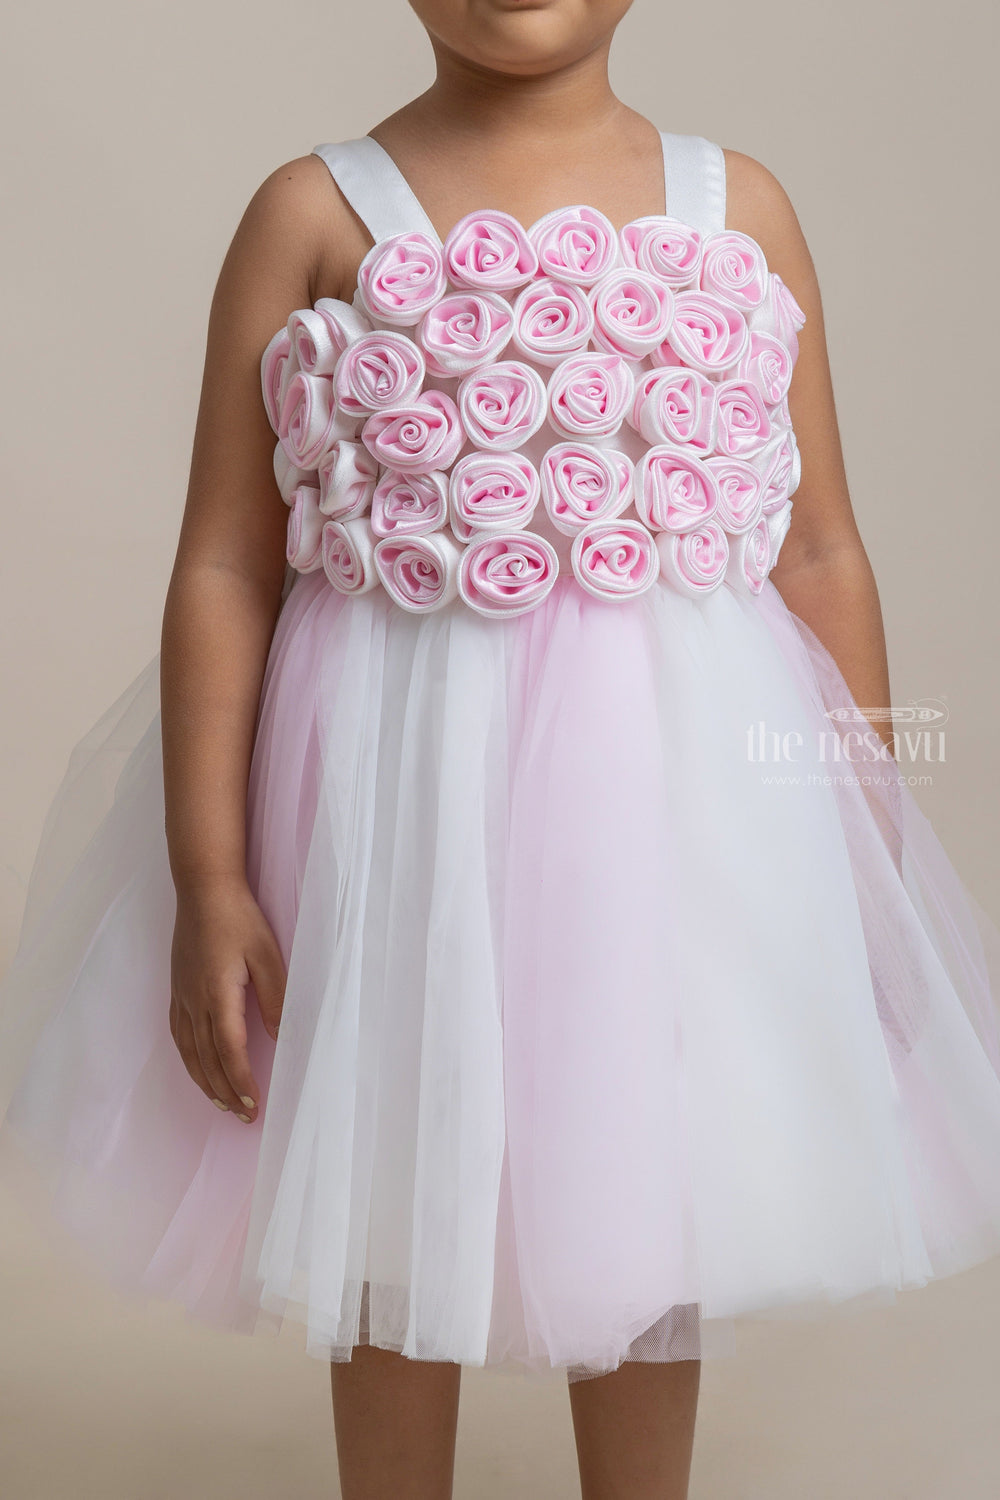 The Nesavu Girls Tutu Frock Gorgeous Pink and White Satin Flower Crafted Soft Tulle Frock for Girls Nesavu Trendy Party Frock For Girls | Party Wear Collection | The Nesavu